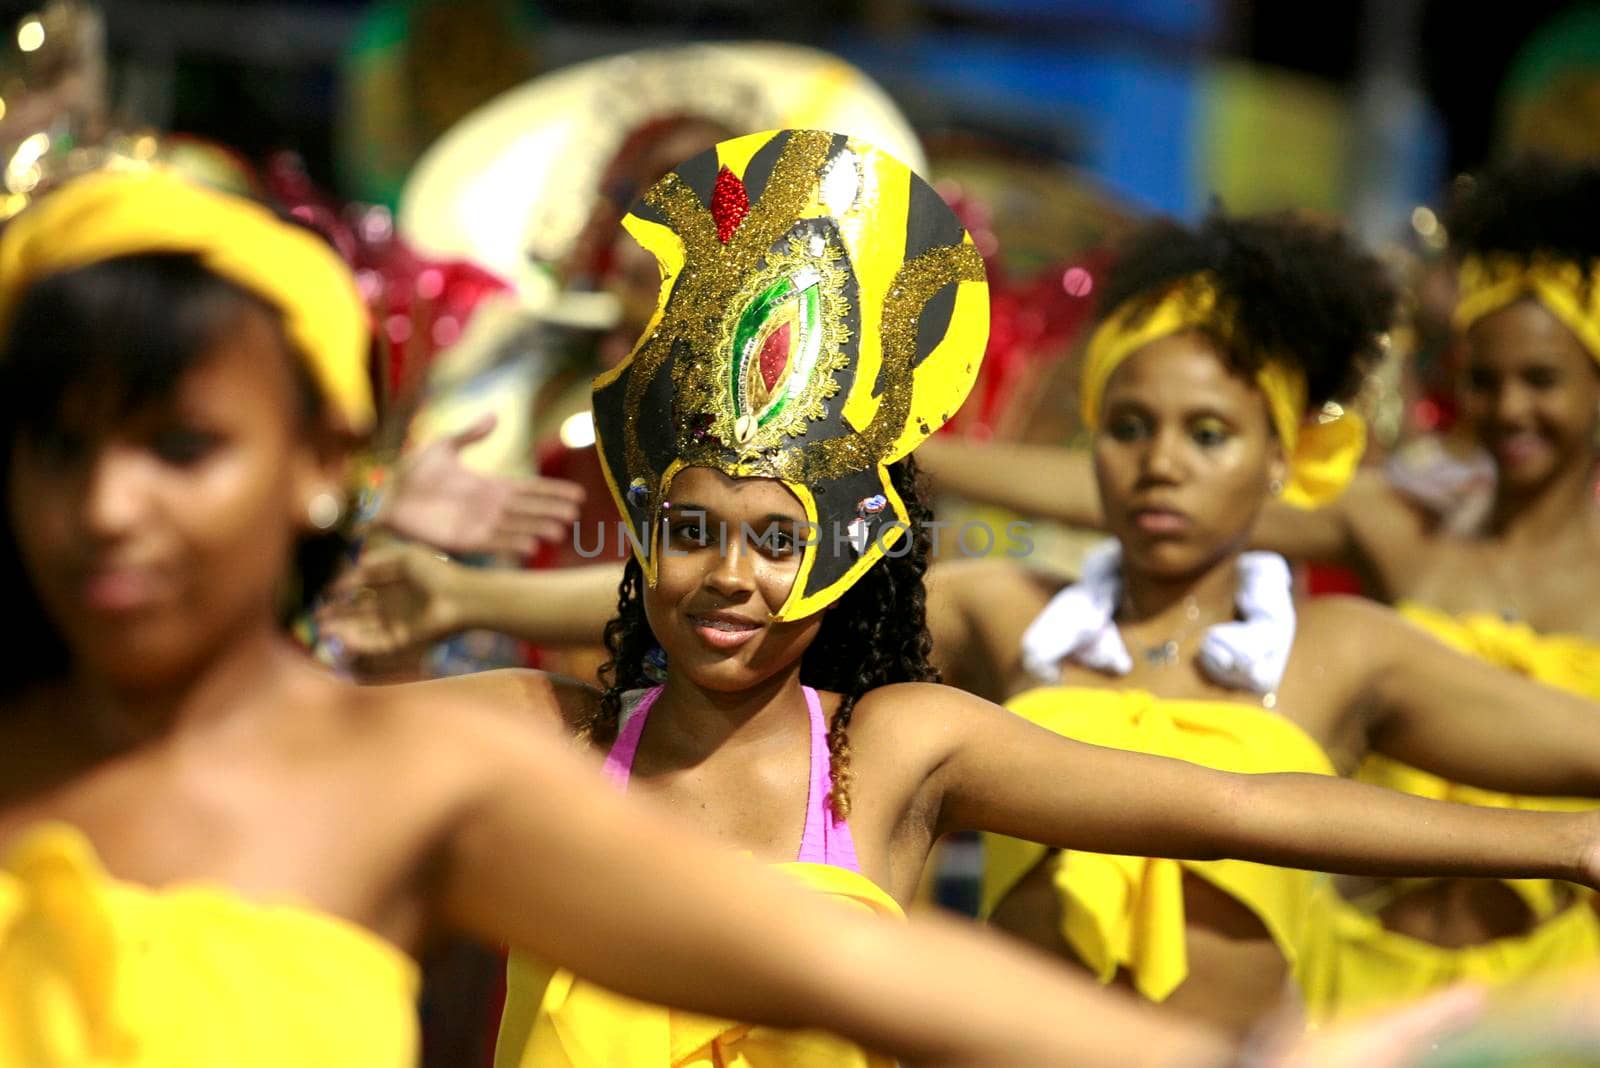 salvador, bahia / brazil - february 14, 2015: Members of the Afro Muzenza block are seen in Campo Grande during the Carnival celebrations in the city of Salvador.